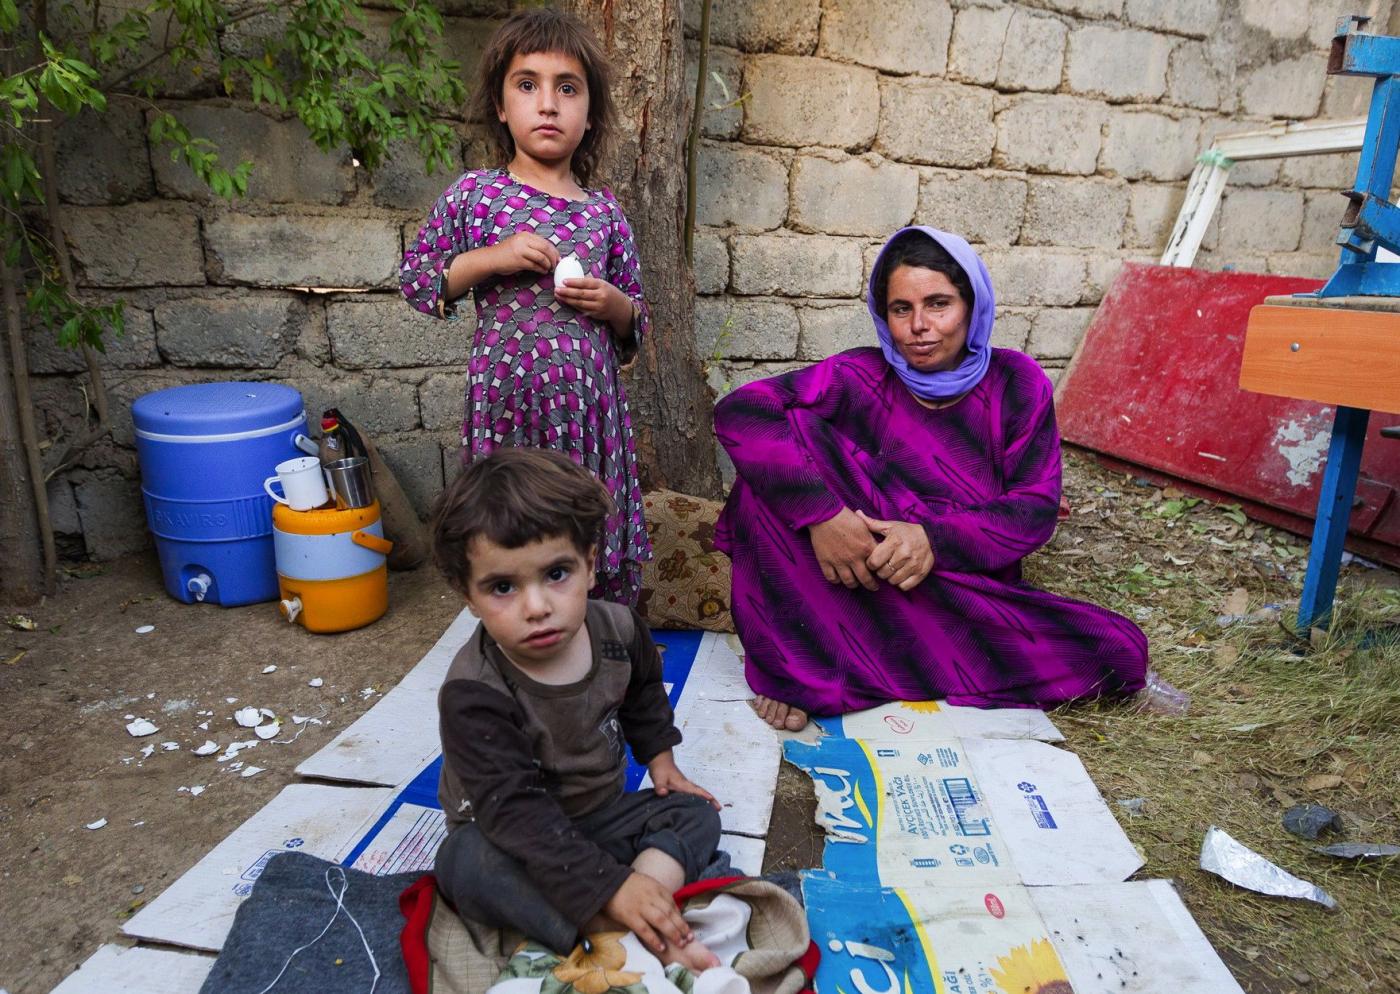 A displaced family sets up a camp on the front yard of a school in Northern Iraq. © WCC/Gregg Brekke